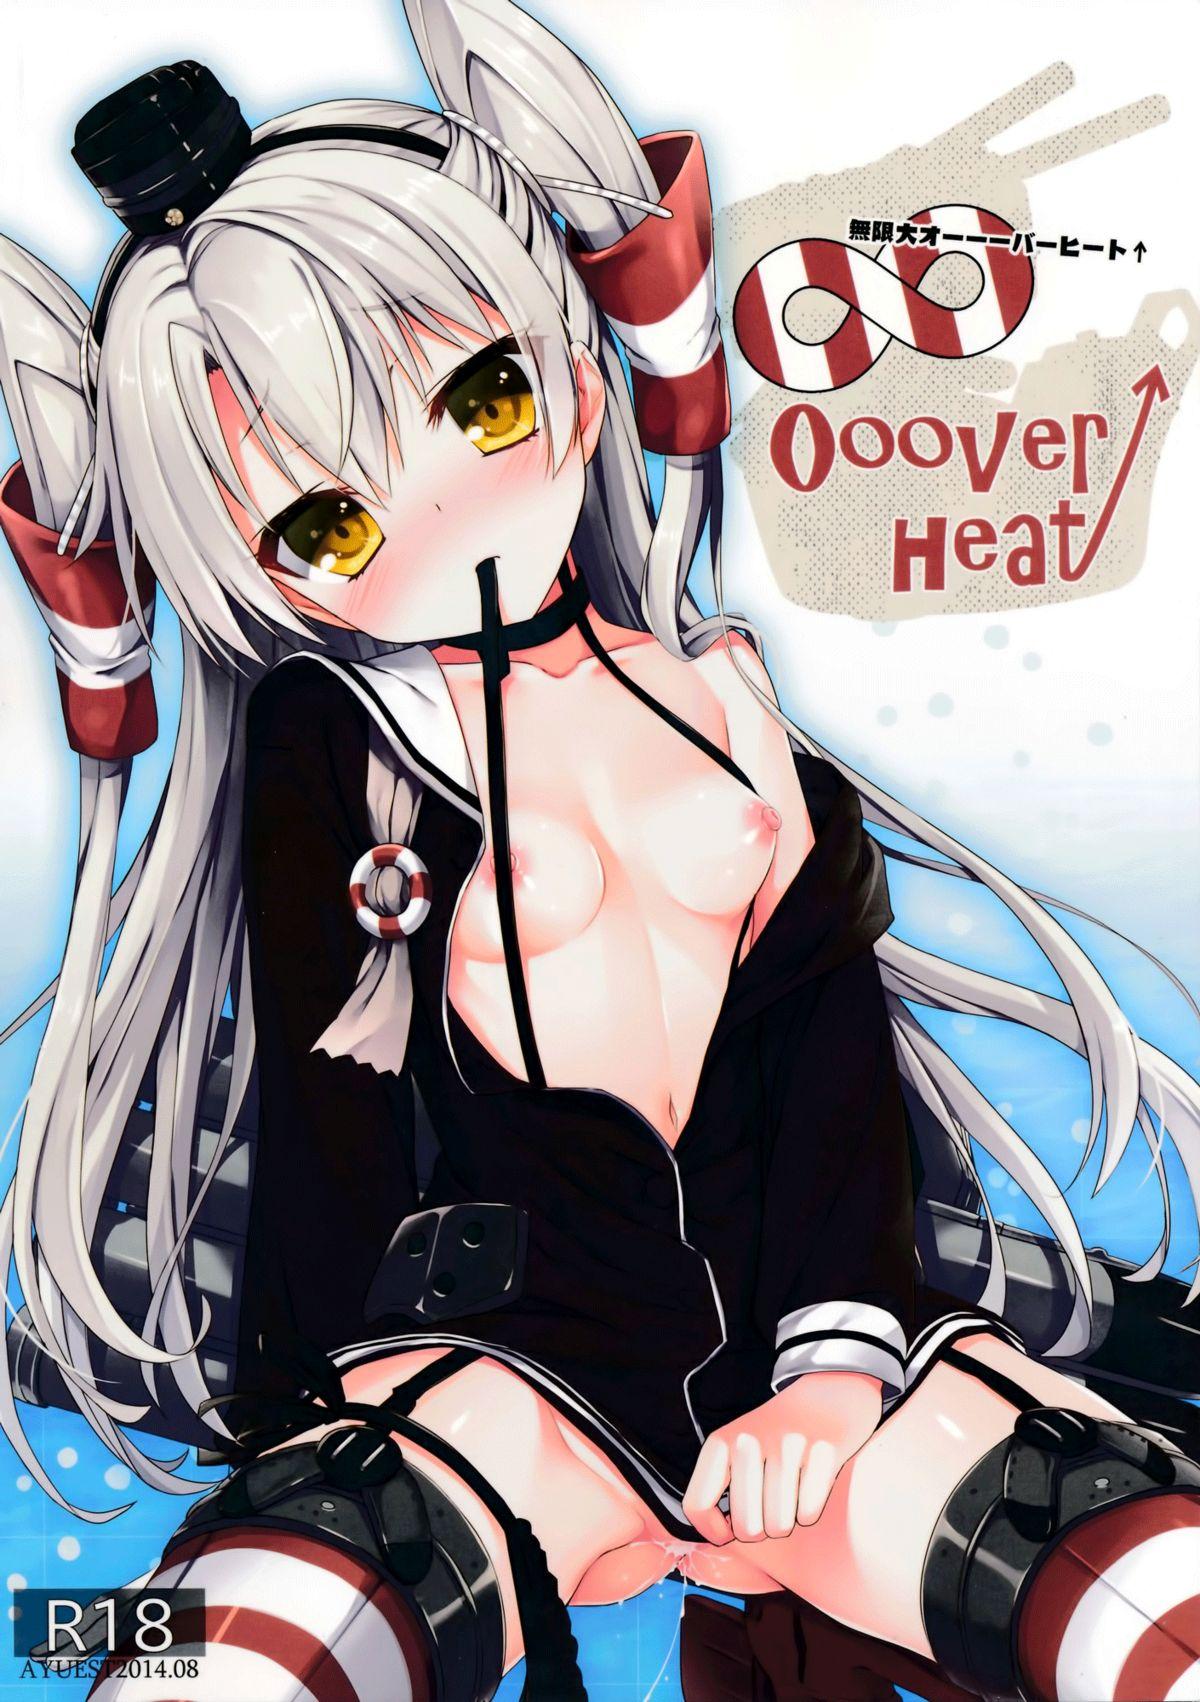 Spain ∞Oooverheat↑ - Kantai collection Cuminmouth - Picture 1